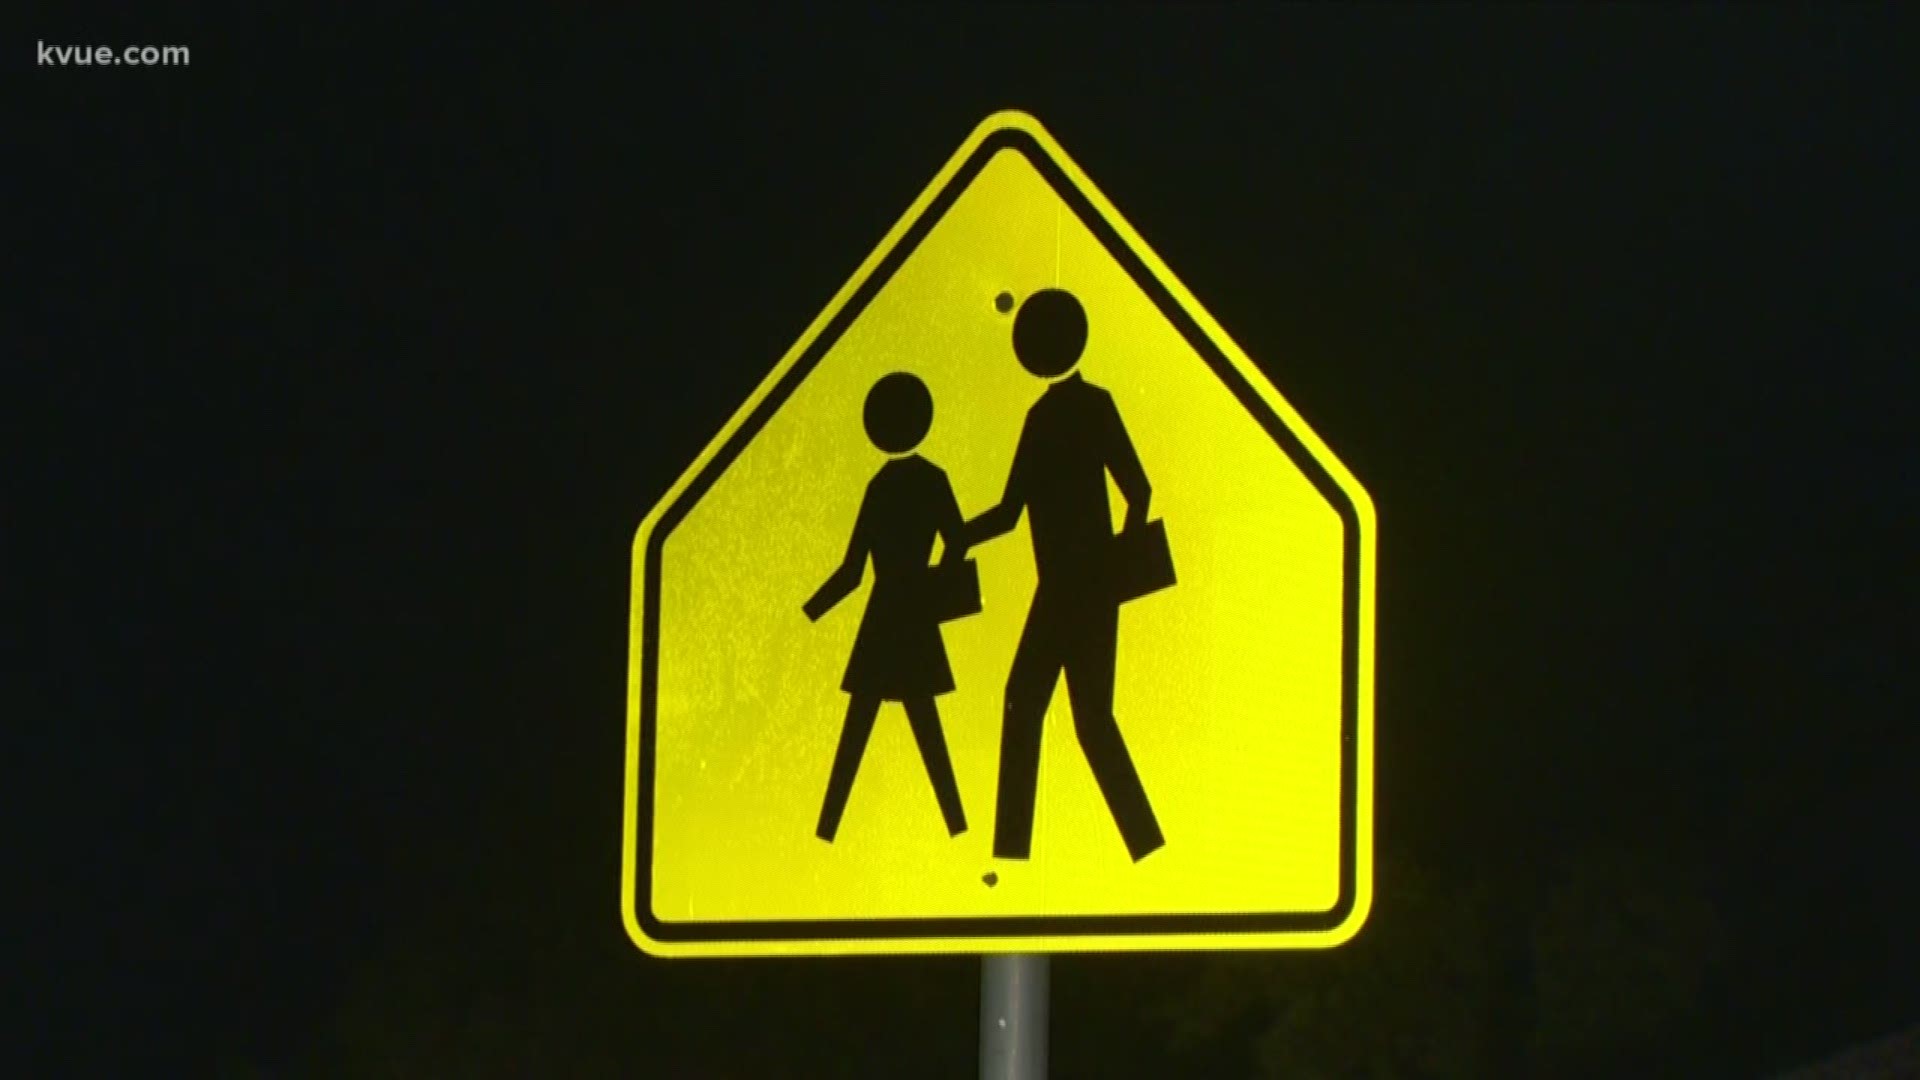 According to Cedar Park police, two students have been hit by cars near a school zone this week.